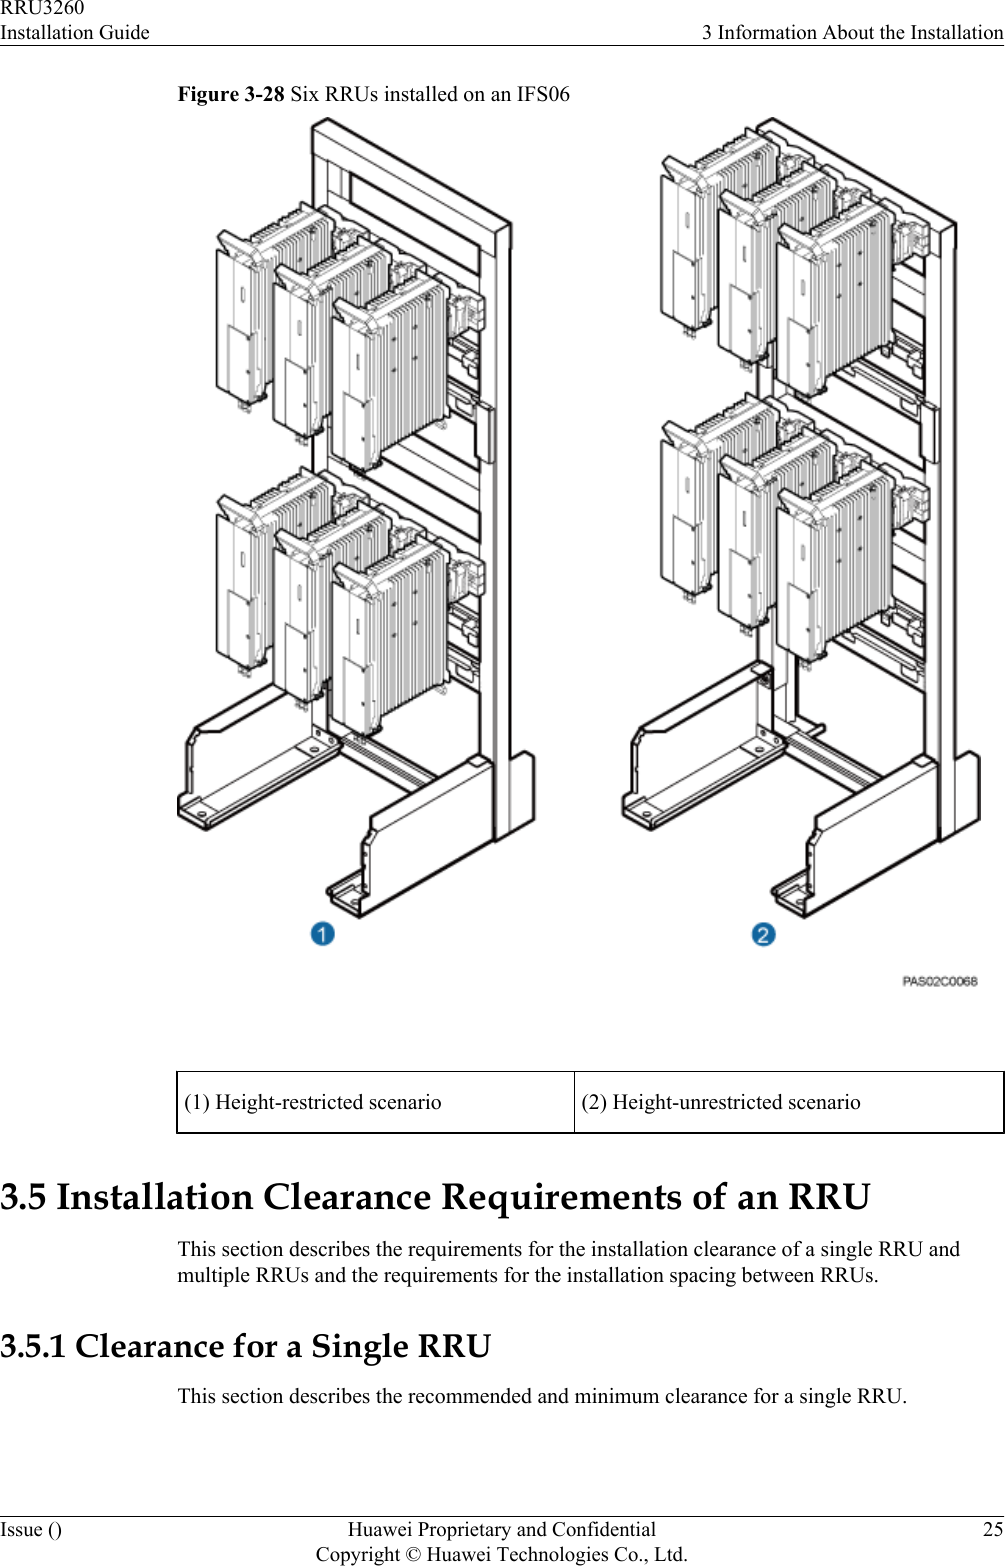 Figure 3-28 Six RRUs installed on an IFS06 (1) Height-restricted scenario (2) Height-unrestricted scenario3.5 Installation Clearance Requirements of an RRUThis section describes the requirements for the installation clearance of a single RRU andmultiple RRUs and the requirements for the installation spacing between RRUs.3.5.1 Clearance for a Single RRUThis section describes the recommended and minimum clearance for a single RRU.RRU3260Installation Guide 3 Information About the InstallationIssue () Huawei Proprietary and ConfidentialCopyright © Huawei Technologies Co., Ltd.25